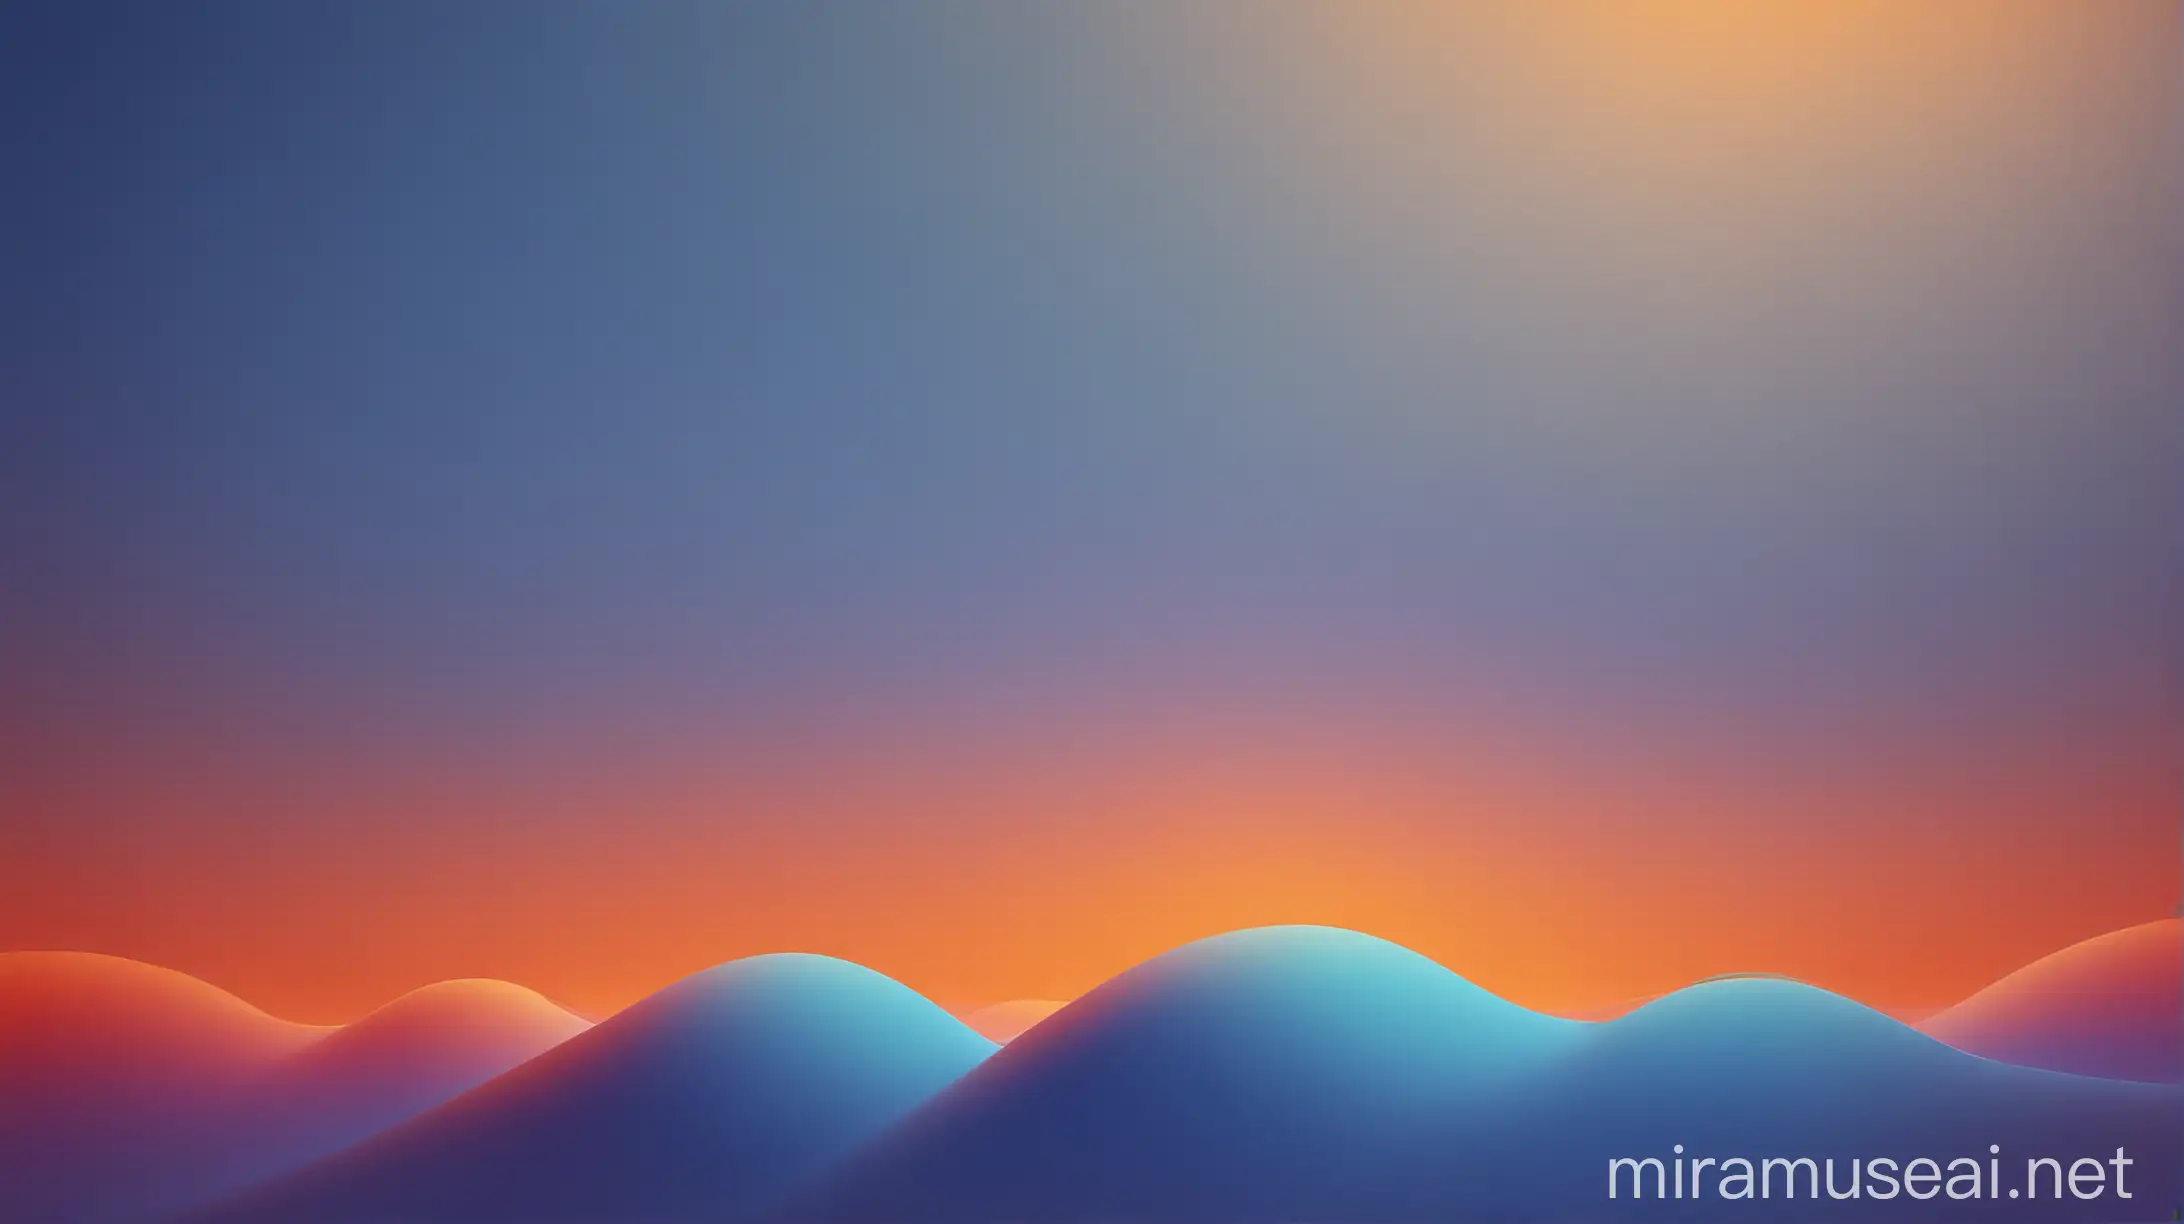 A gradient background transitioning from vibrant blue at the top to energetic orange at the bottom, symbolizing growth and transformation.
